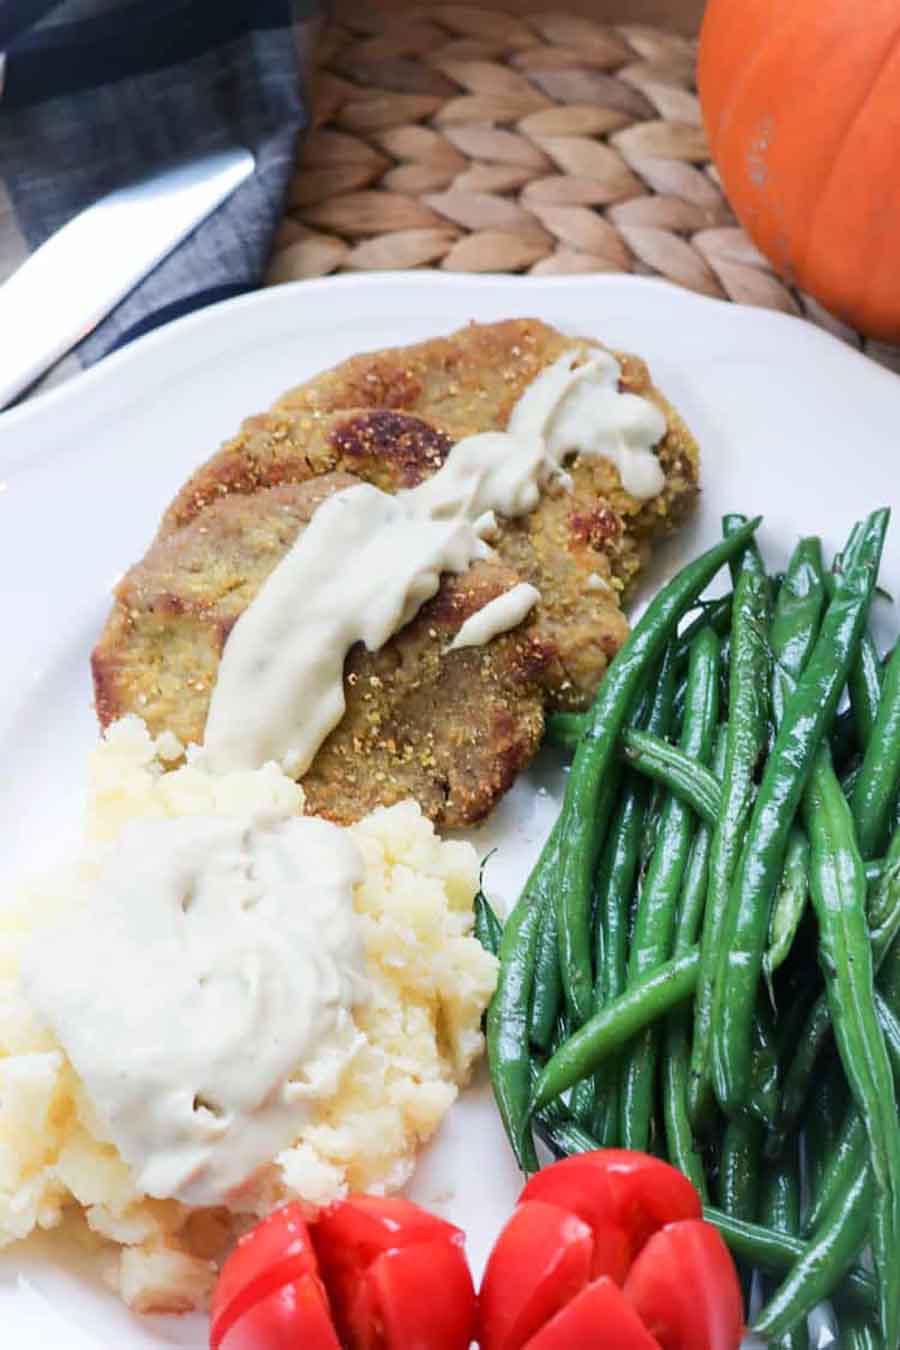 White plate filled with green beans, mashed potatoes, tomatoes, and seitan steaks